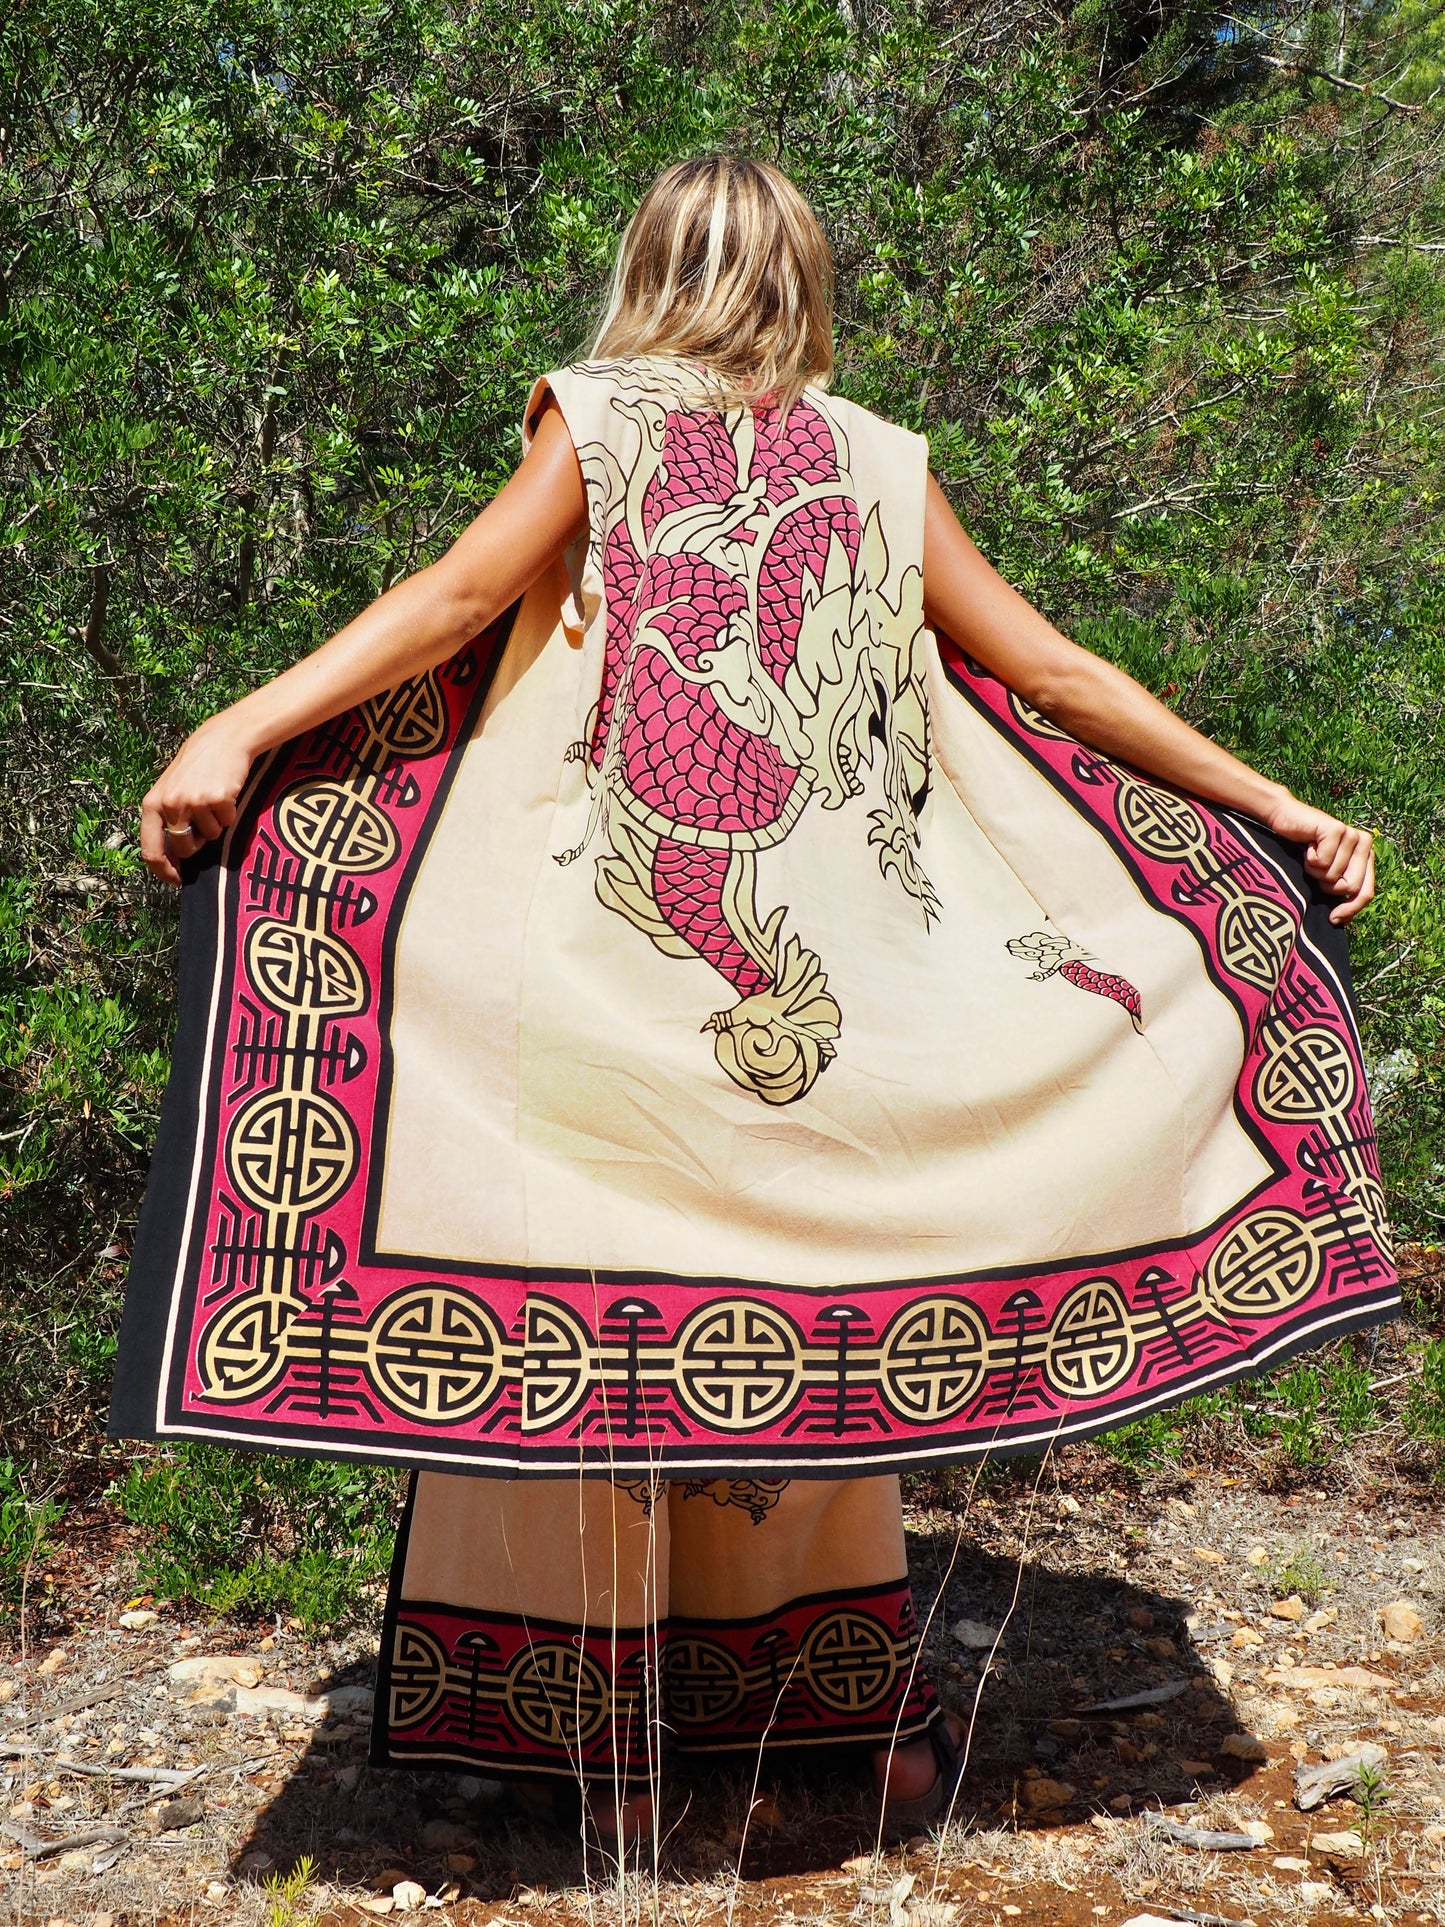 Up-cycled cotton long kimono waistcoat in pink and cream with dragon design and circular motifs by Vagabond Ibiza